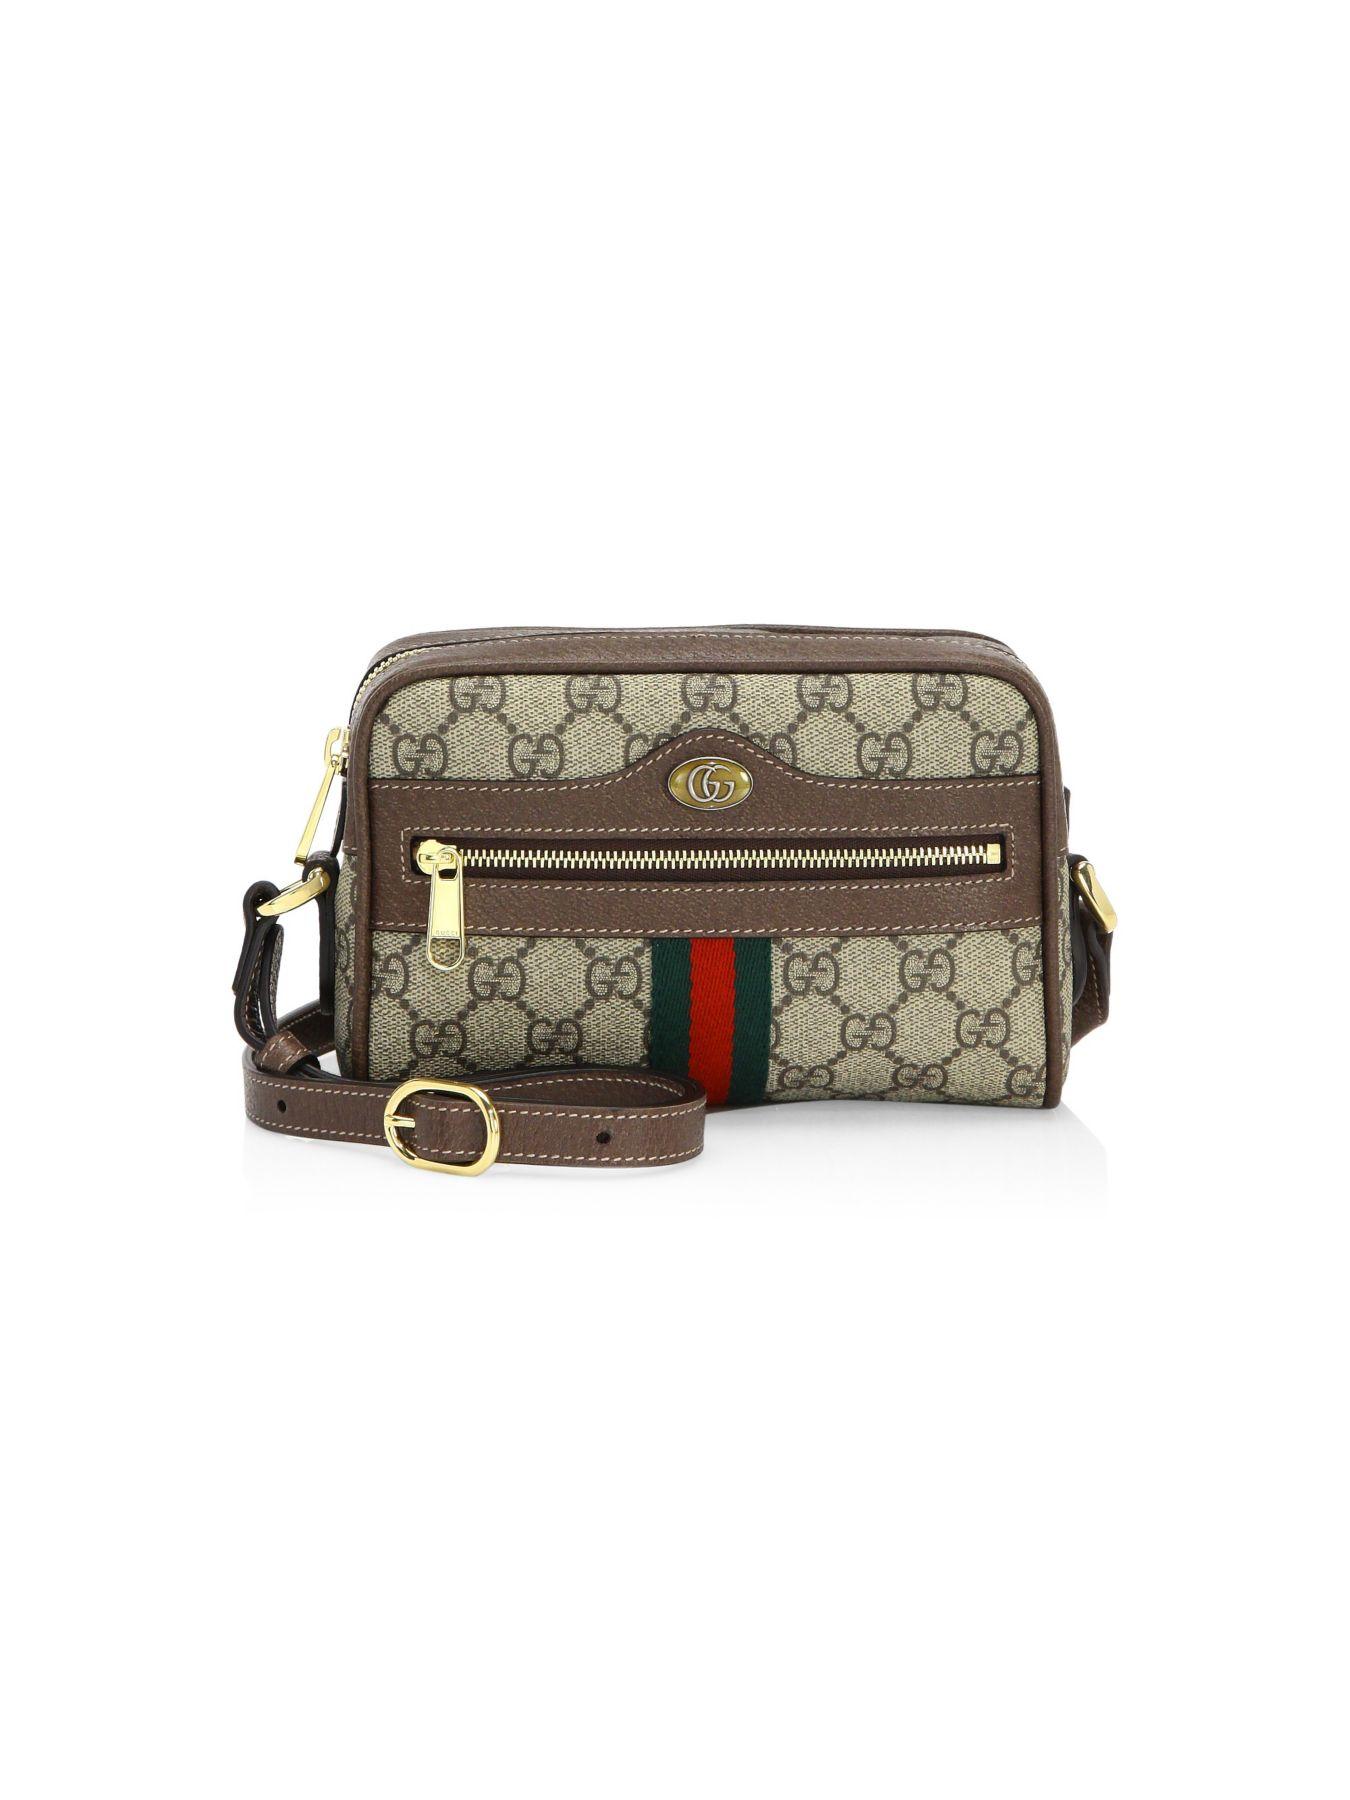 Gucci Canvas Ophidia Small GG Supreme Crossbody Bag in Light Beige (Brown) - Save 20% - Lyst